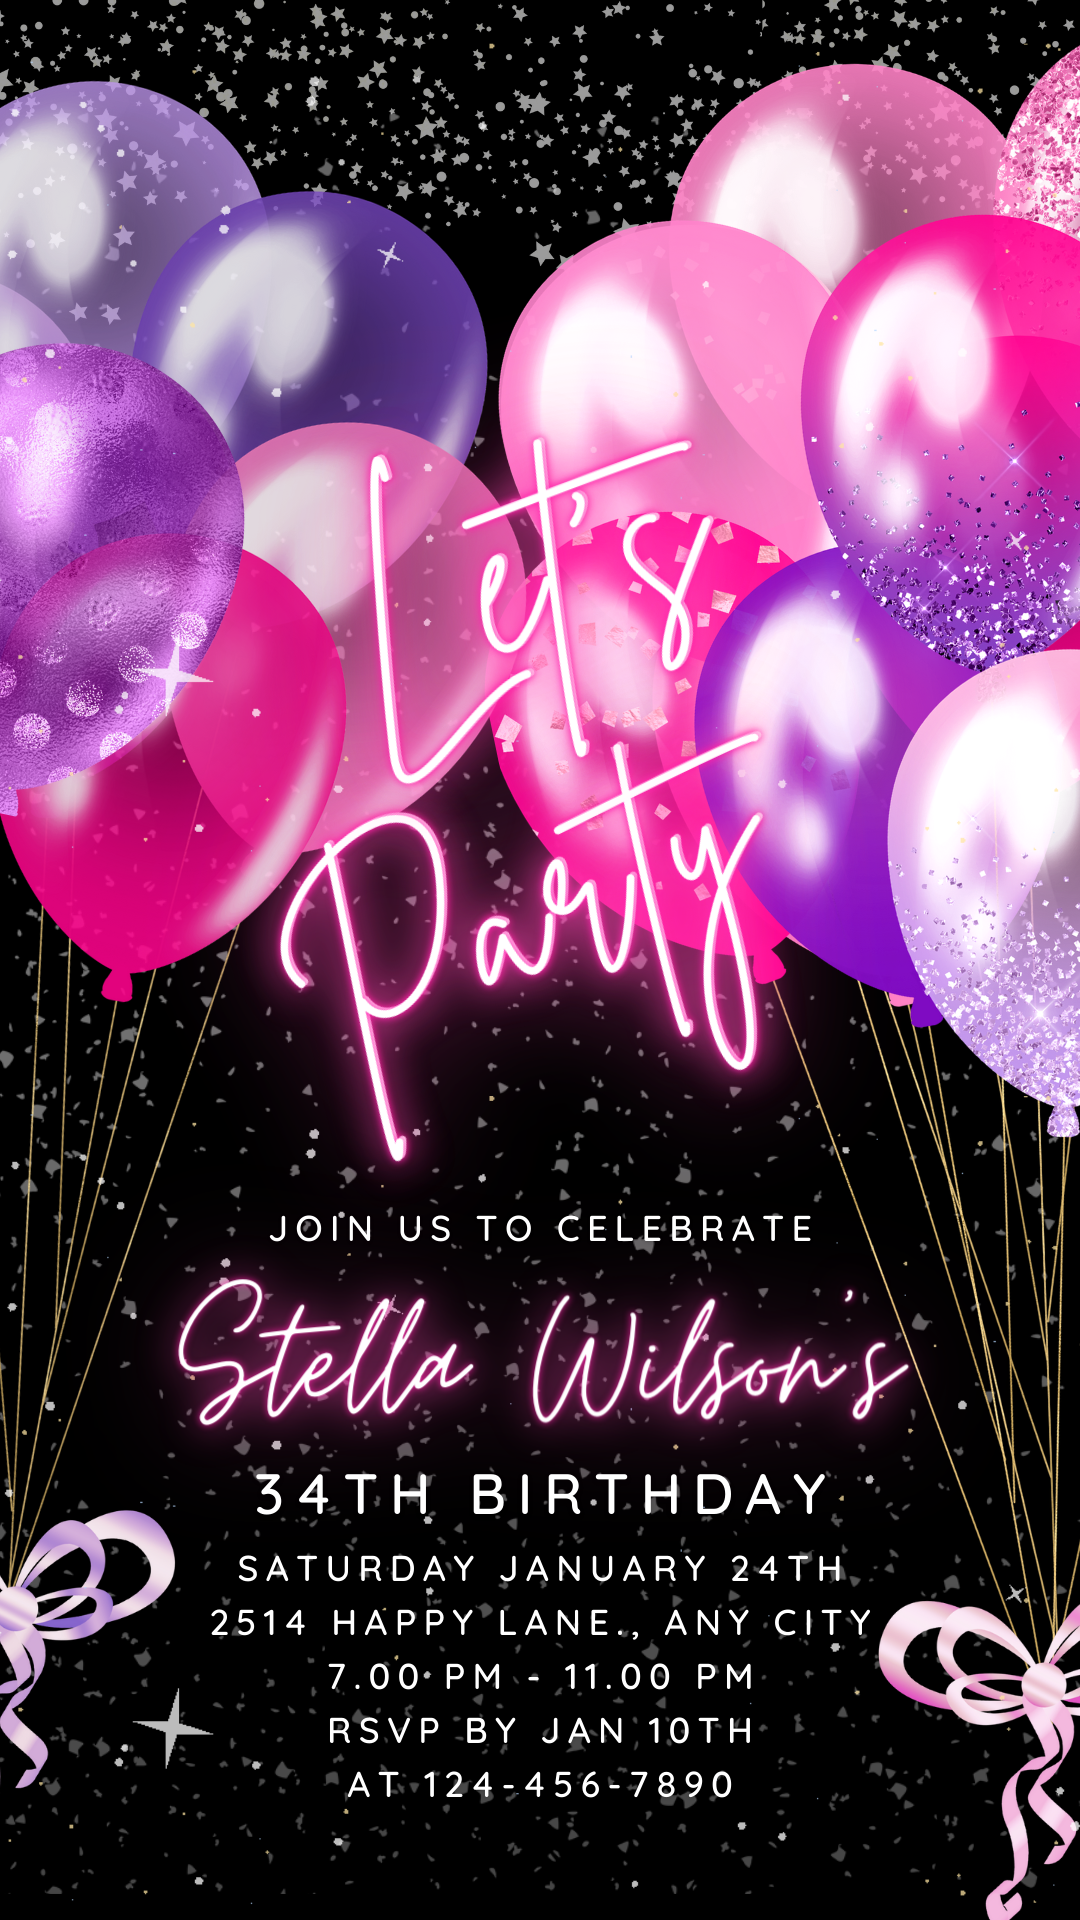 Let's Party Fun Animated Invite for any Event Celebration, Editable Video Template, Birthday invitation for any Age | Digital E-vite